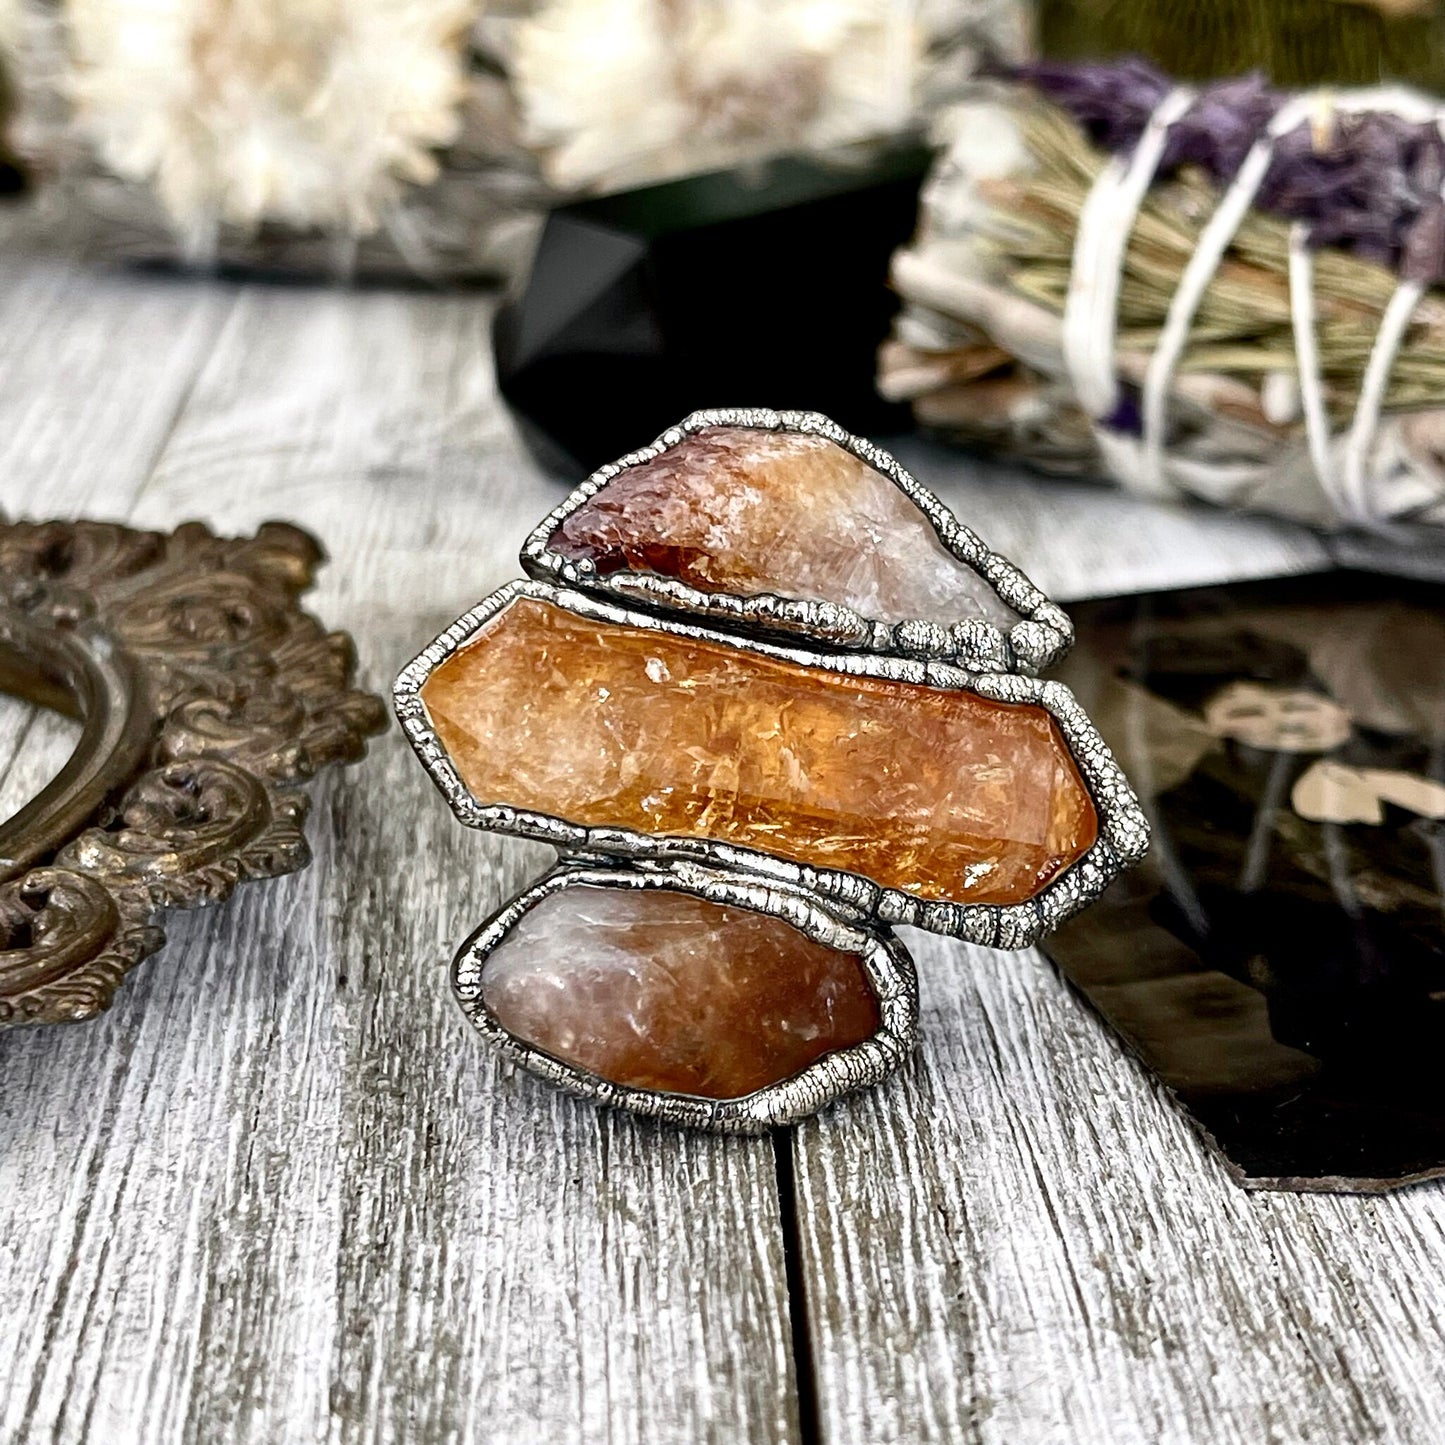 Size 8.5 Crystal Ring - Three Stone Citrine Ring in Sliver / Foxlark Collection - One of a Kind / Big Crystal Jewel // Alternative Boho Ring